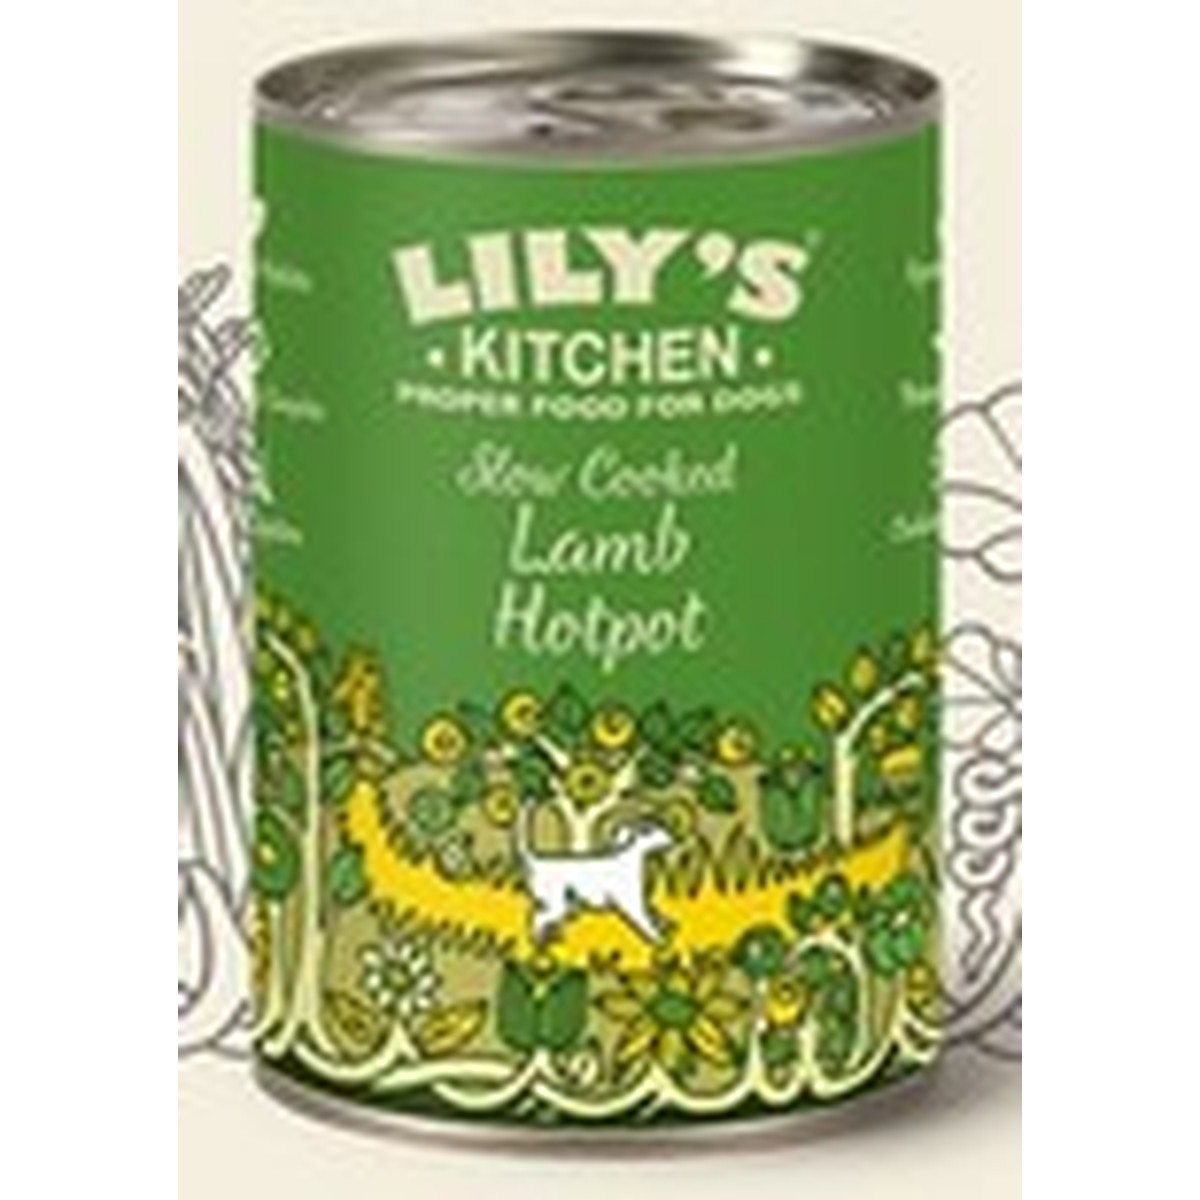 Lily's  Lily's dog Adult Lamb Hotpot 400g  400g